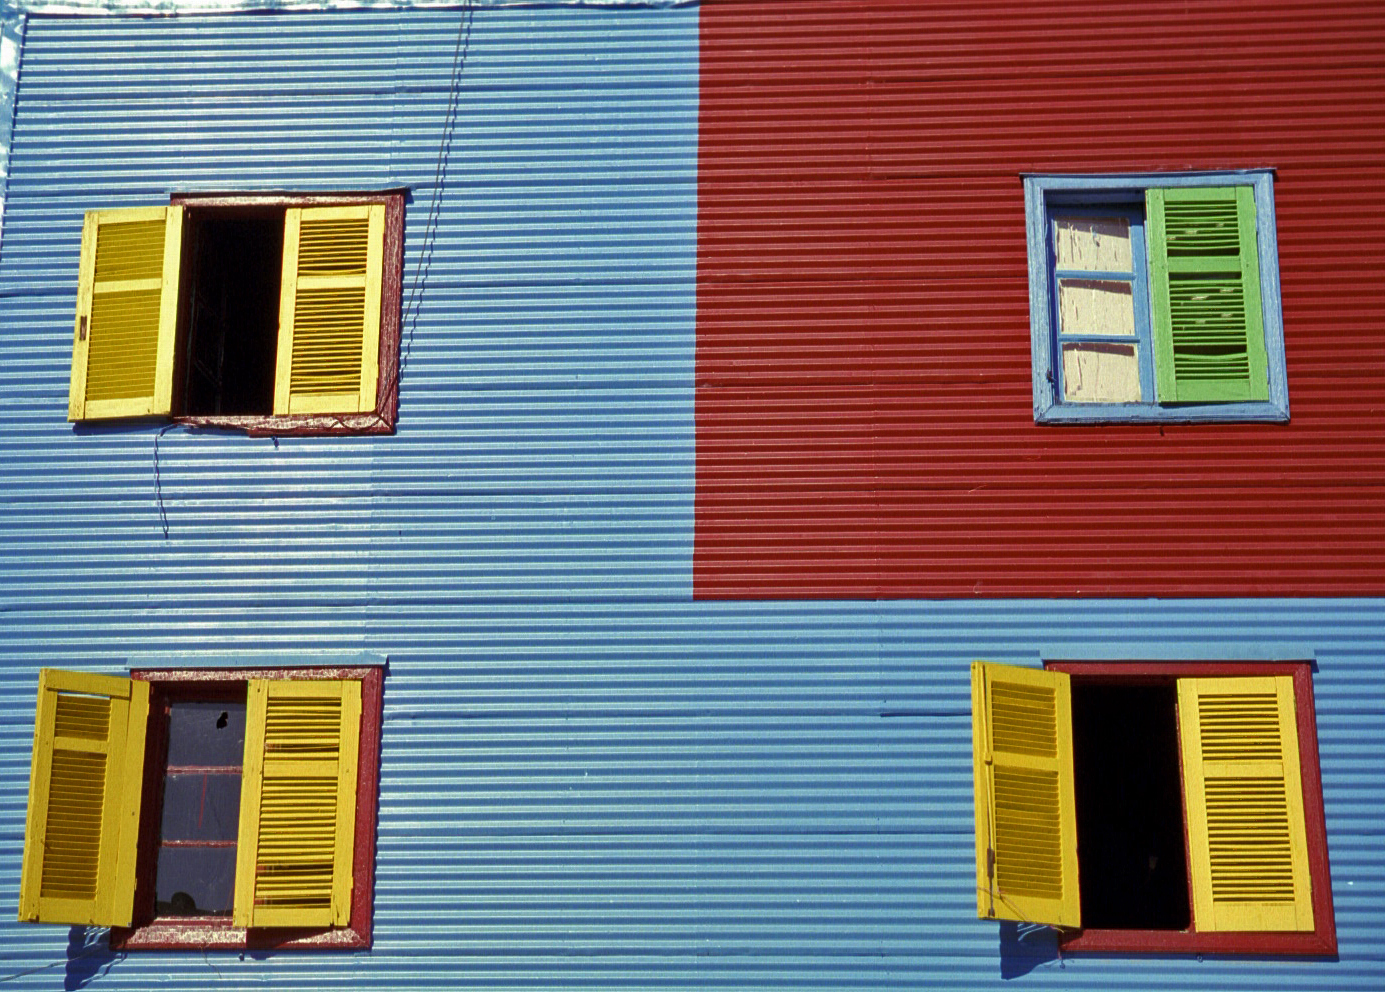 the La Boca neighborhood, Buenos Aires (this image not suitable for large prints)